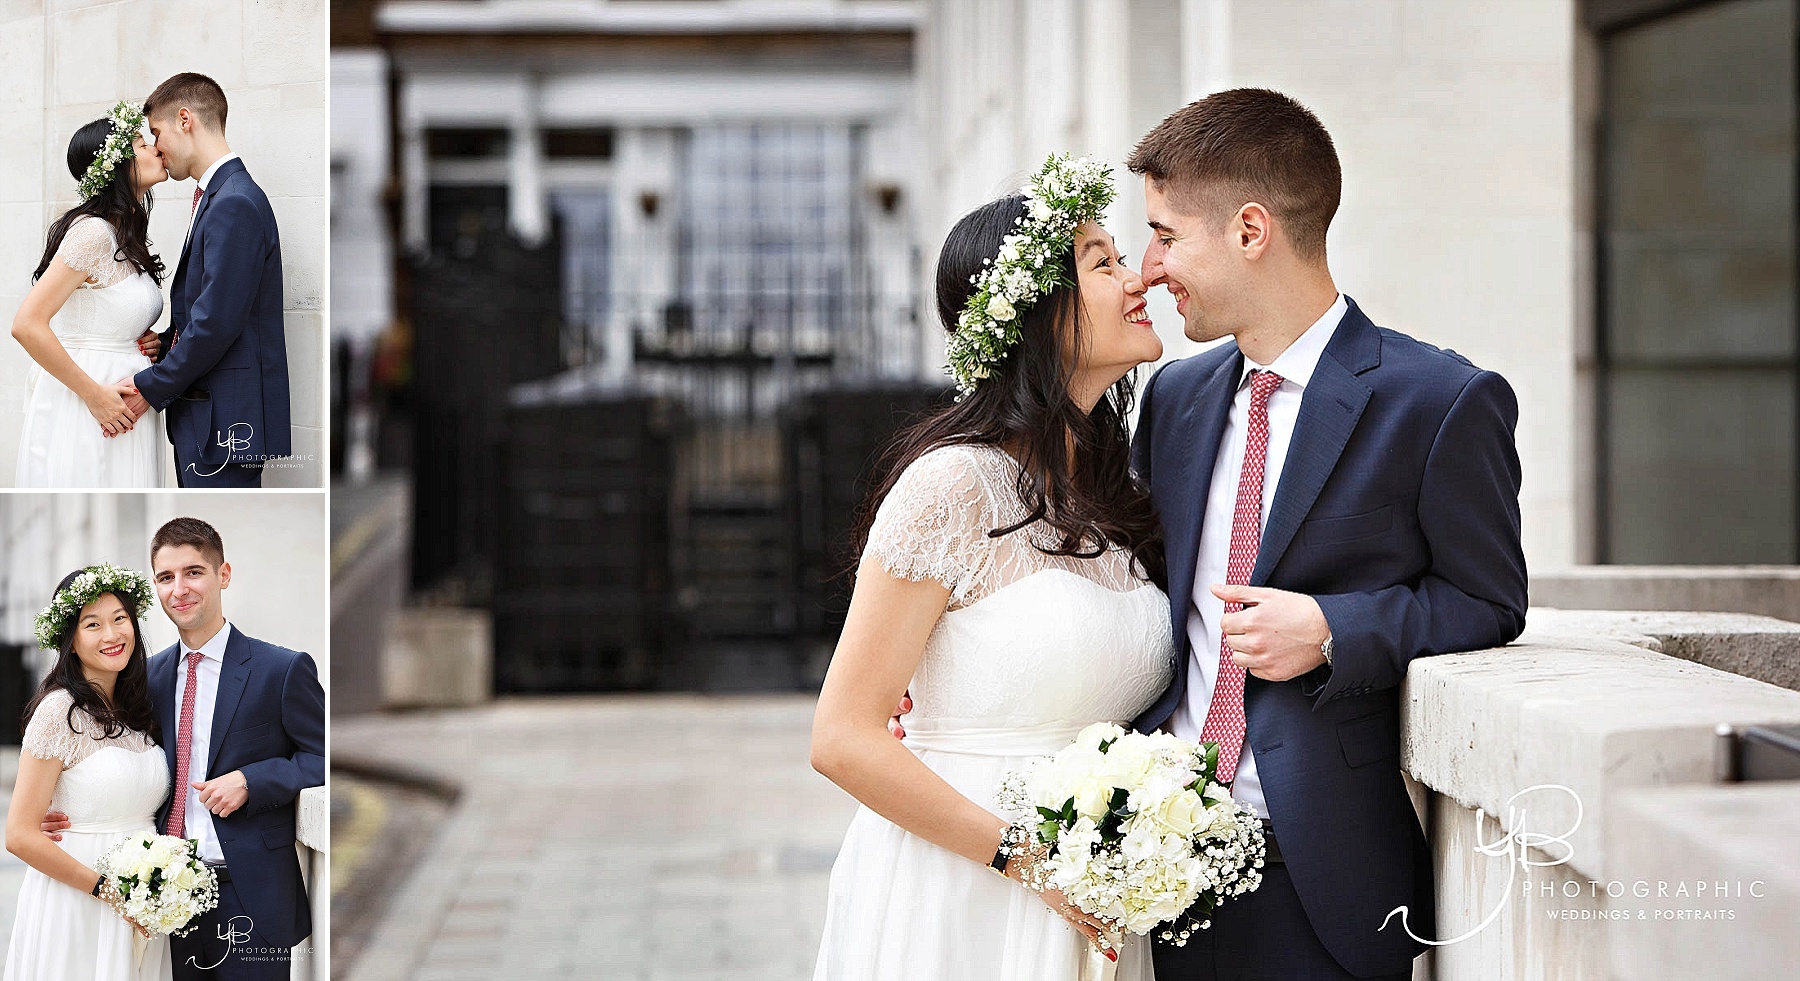 Newlyweds kiss after their intimate Soho Room wedding ceremony in central London. 